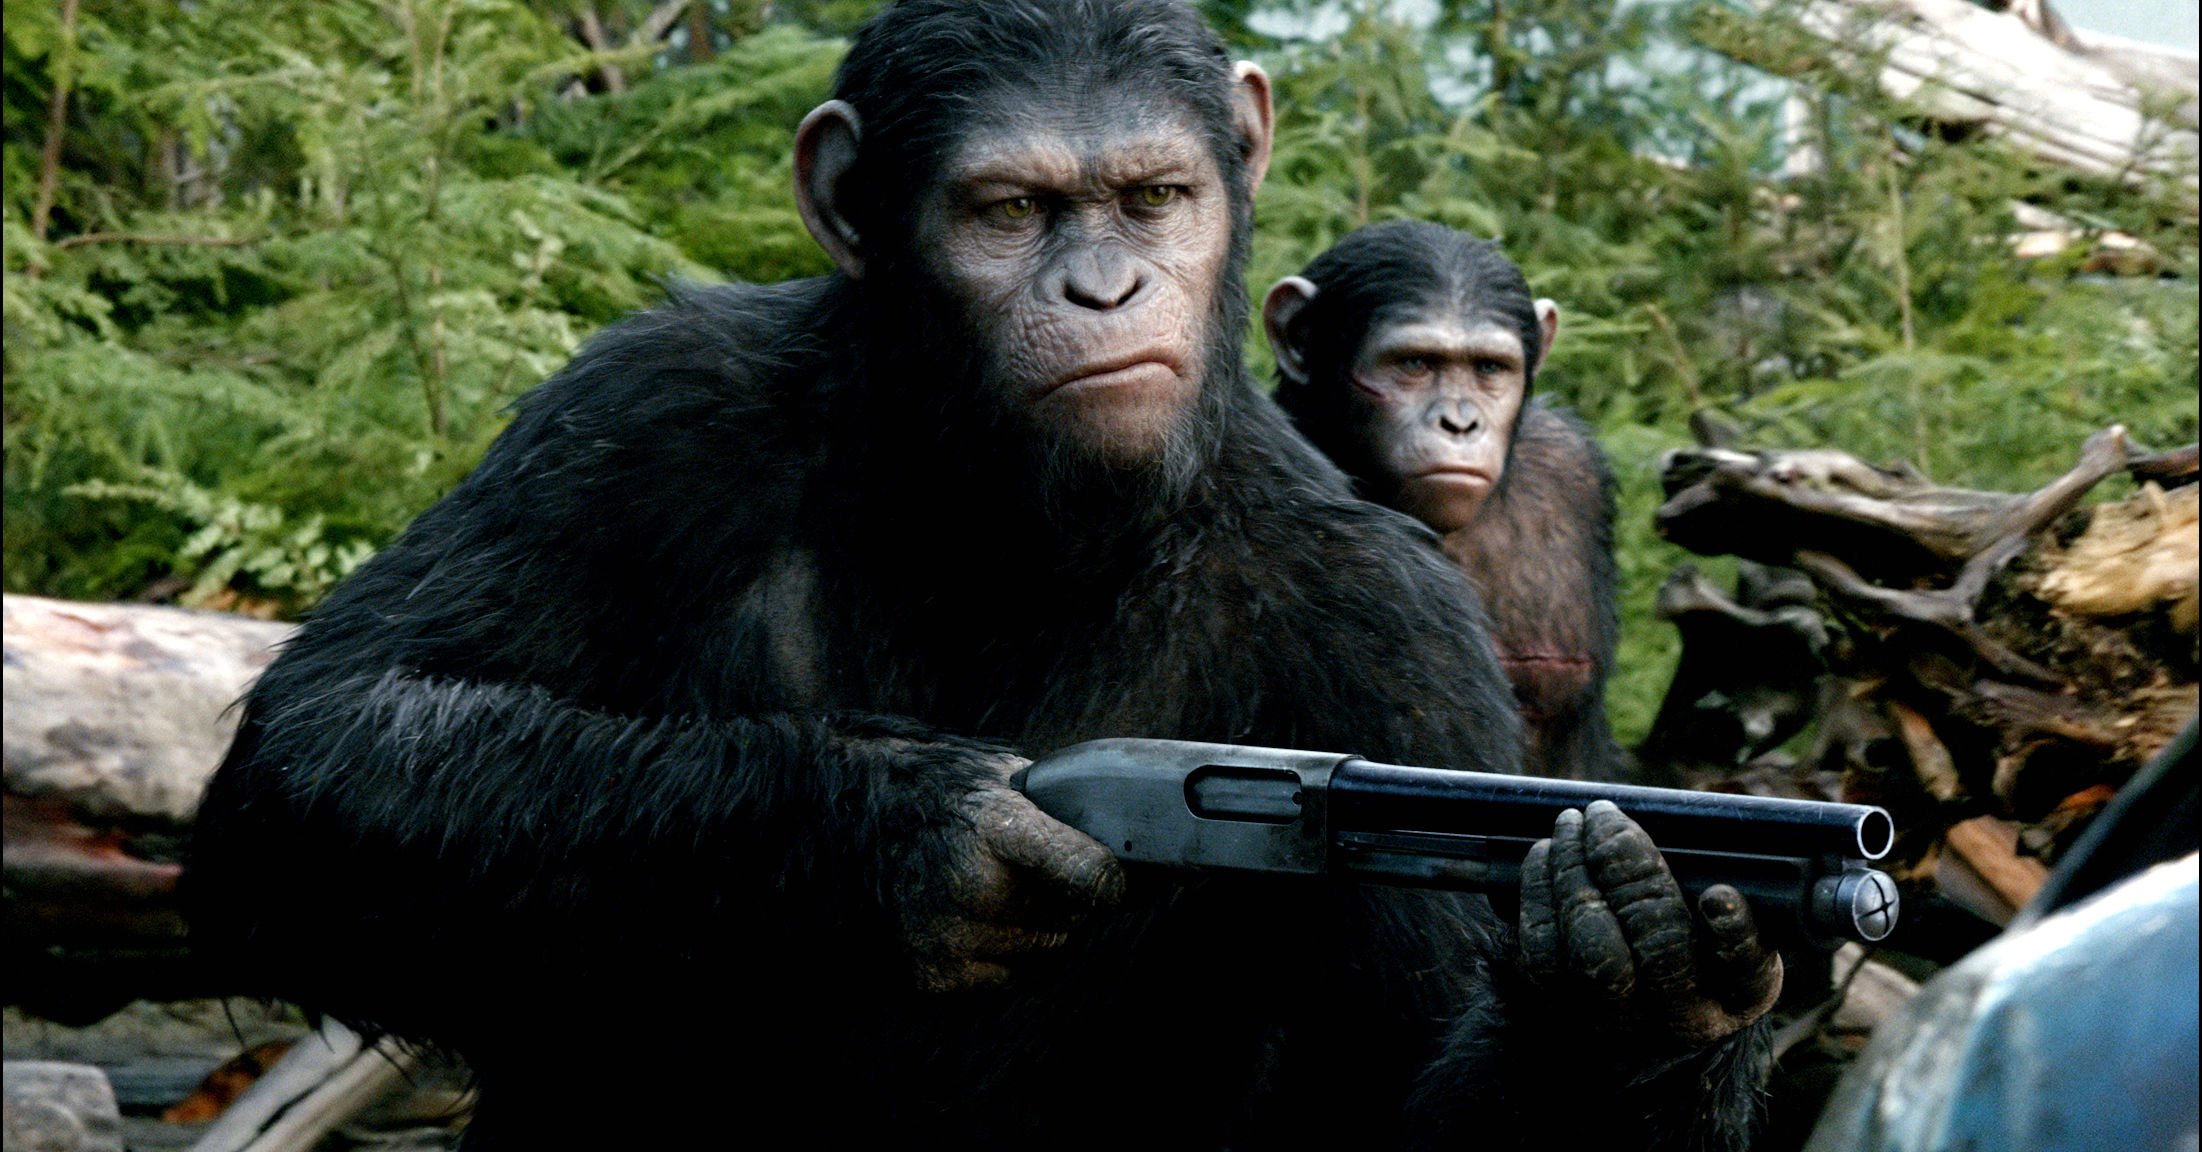 dawn of the apes, Action, Drama, Sci fi, Dawn, Planet, Apes, Monkey, Adventure,  74 Wallpaper